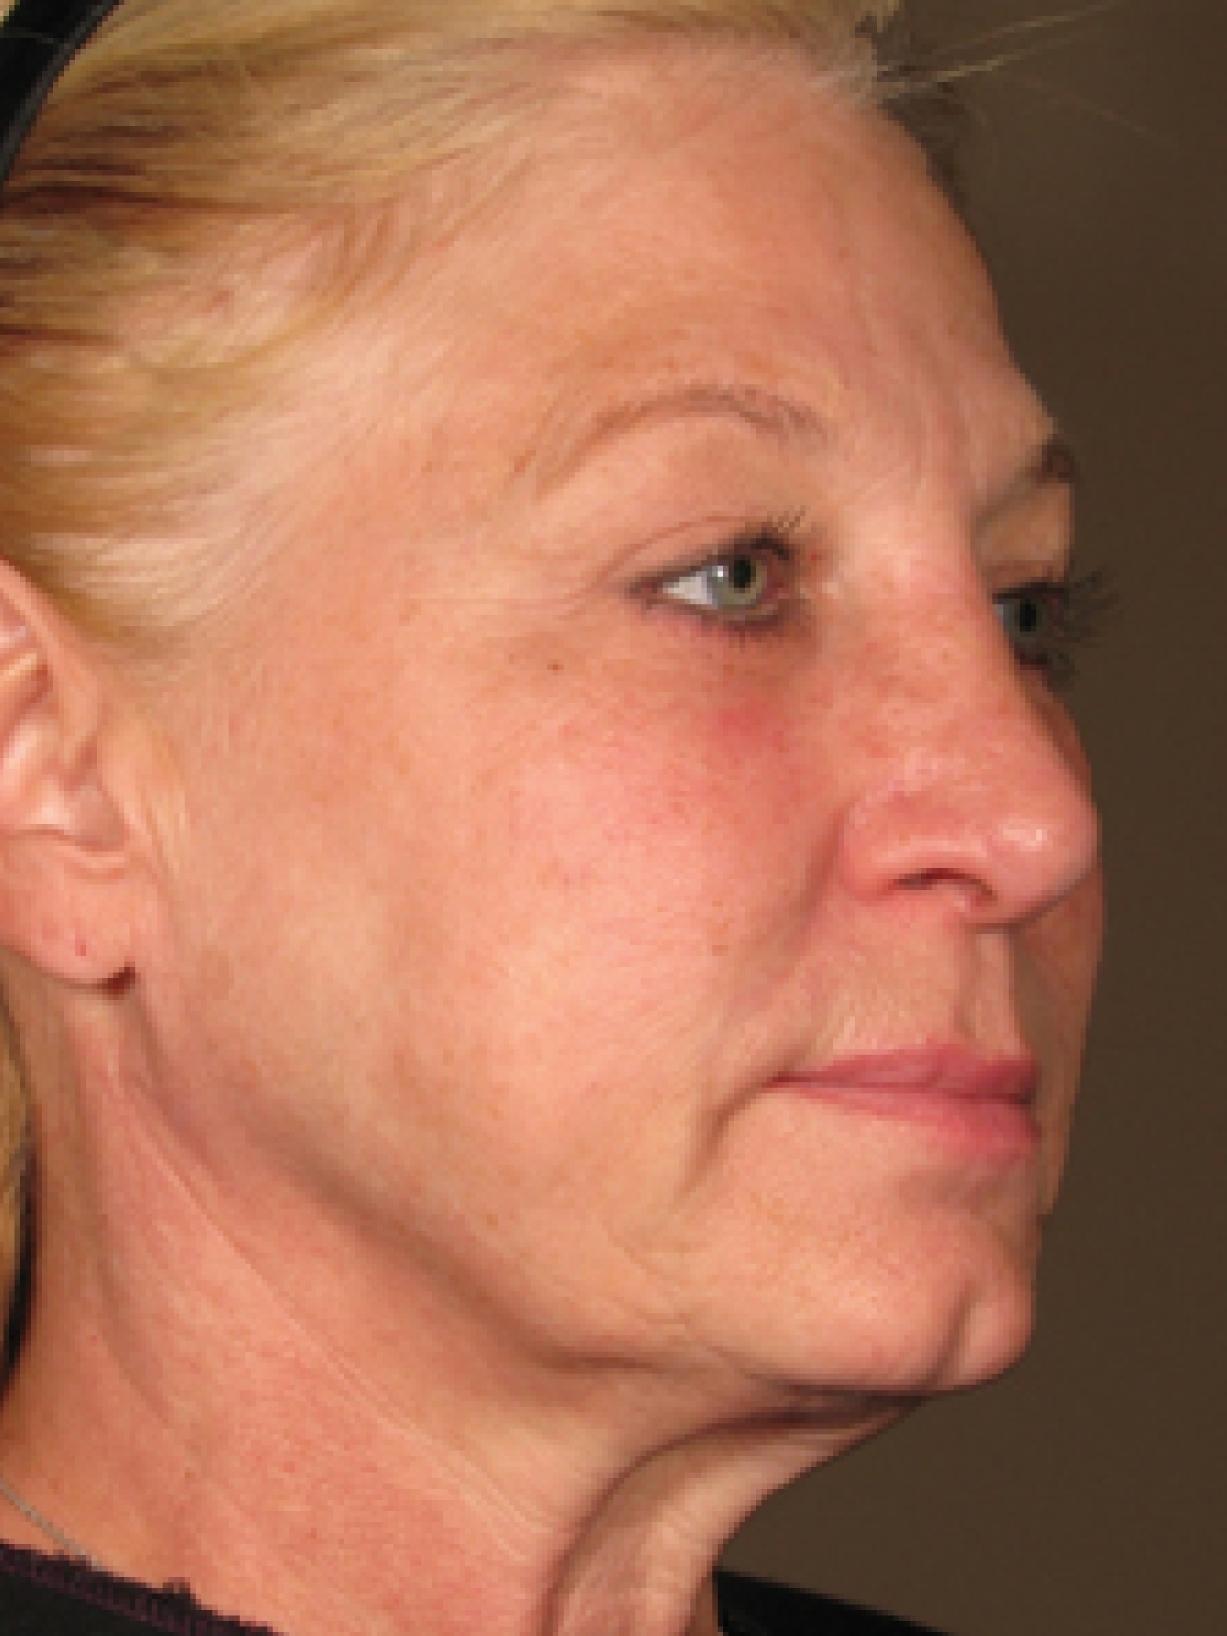 Ultherapy® - Face: Patient 4 - After 1